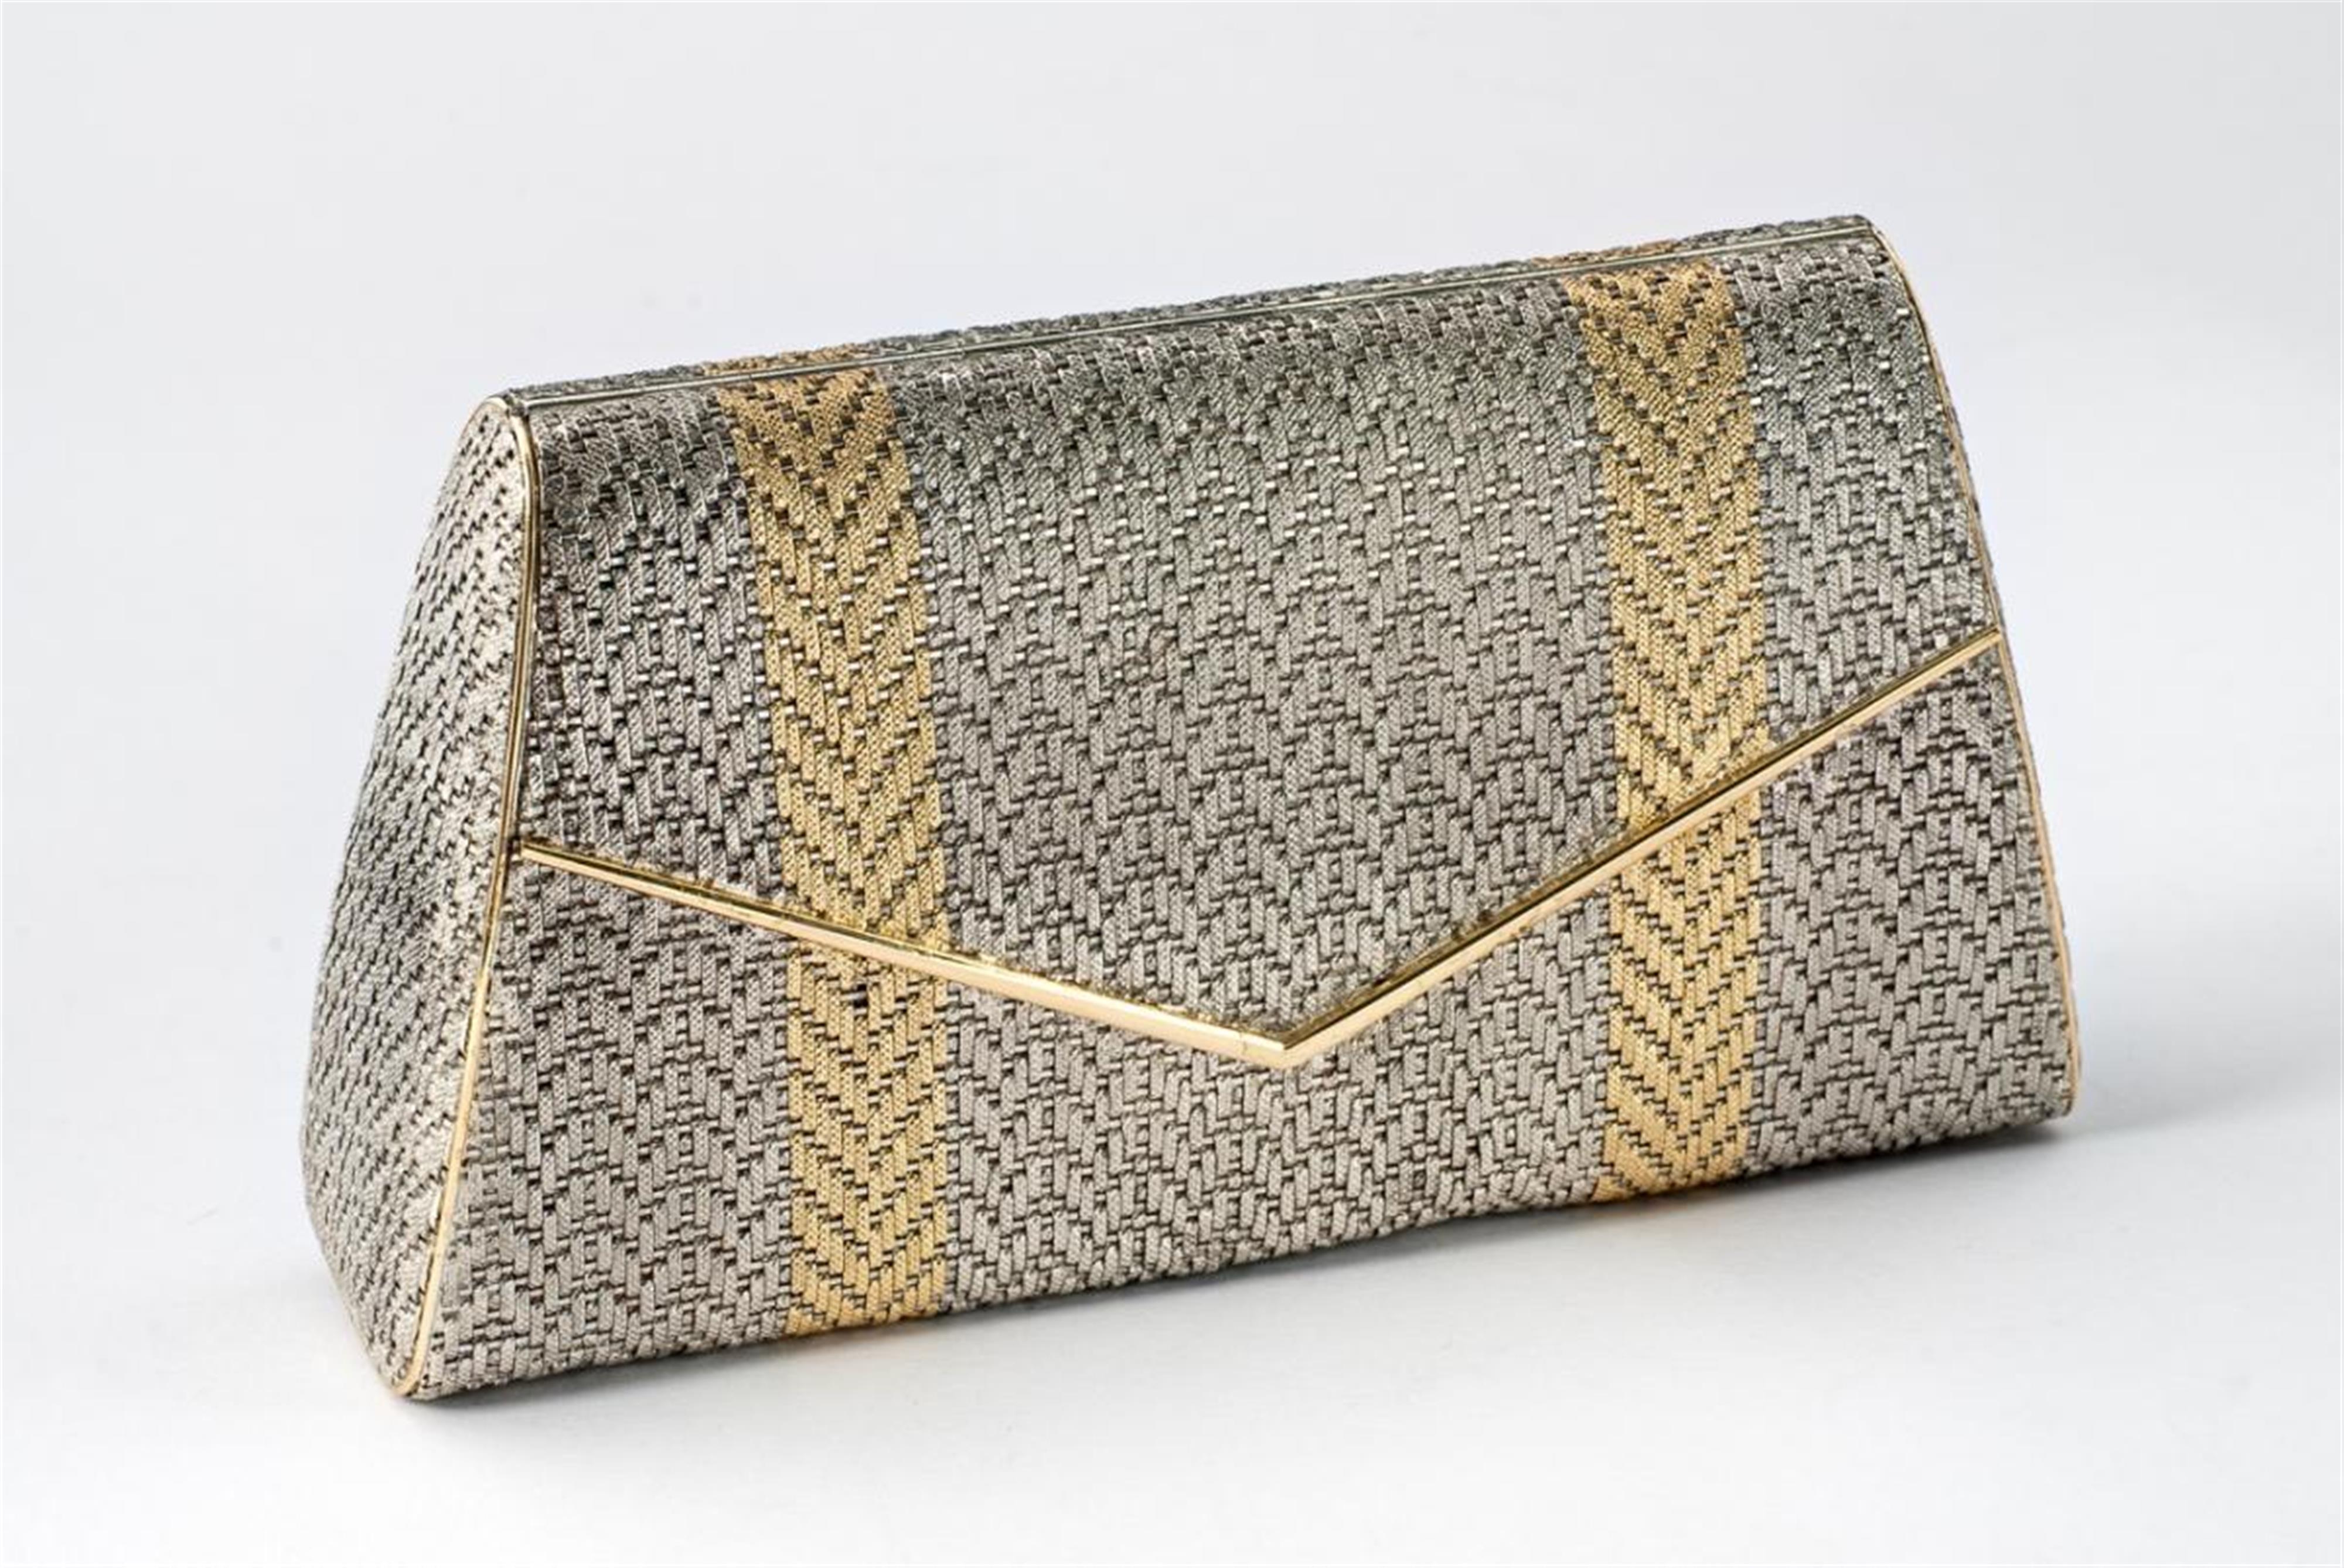 A small partially gilt silver clutch bag with gold mounted edges - image-1